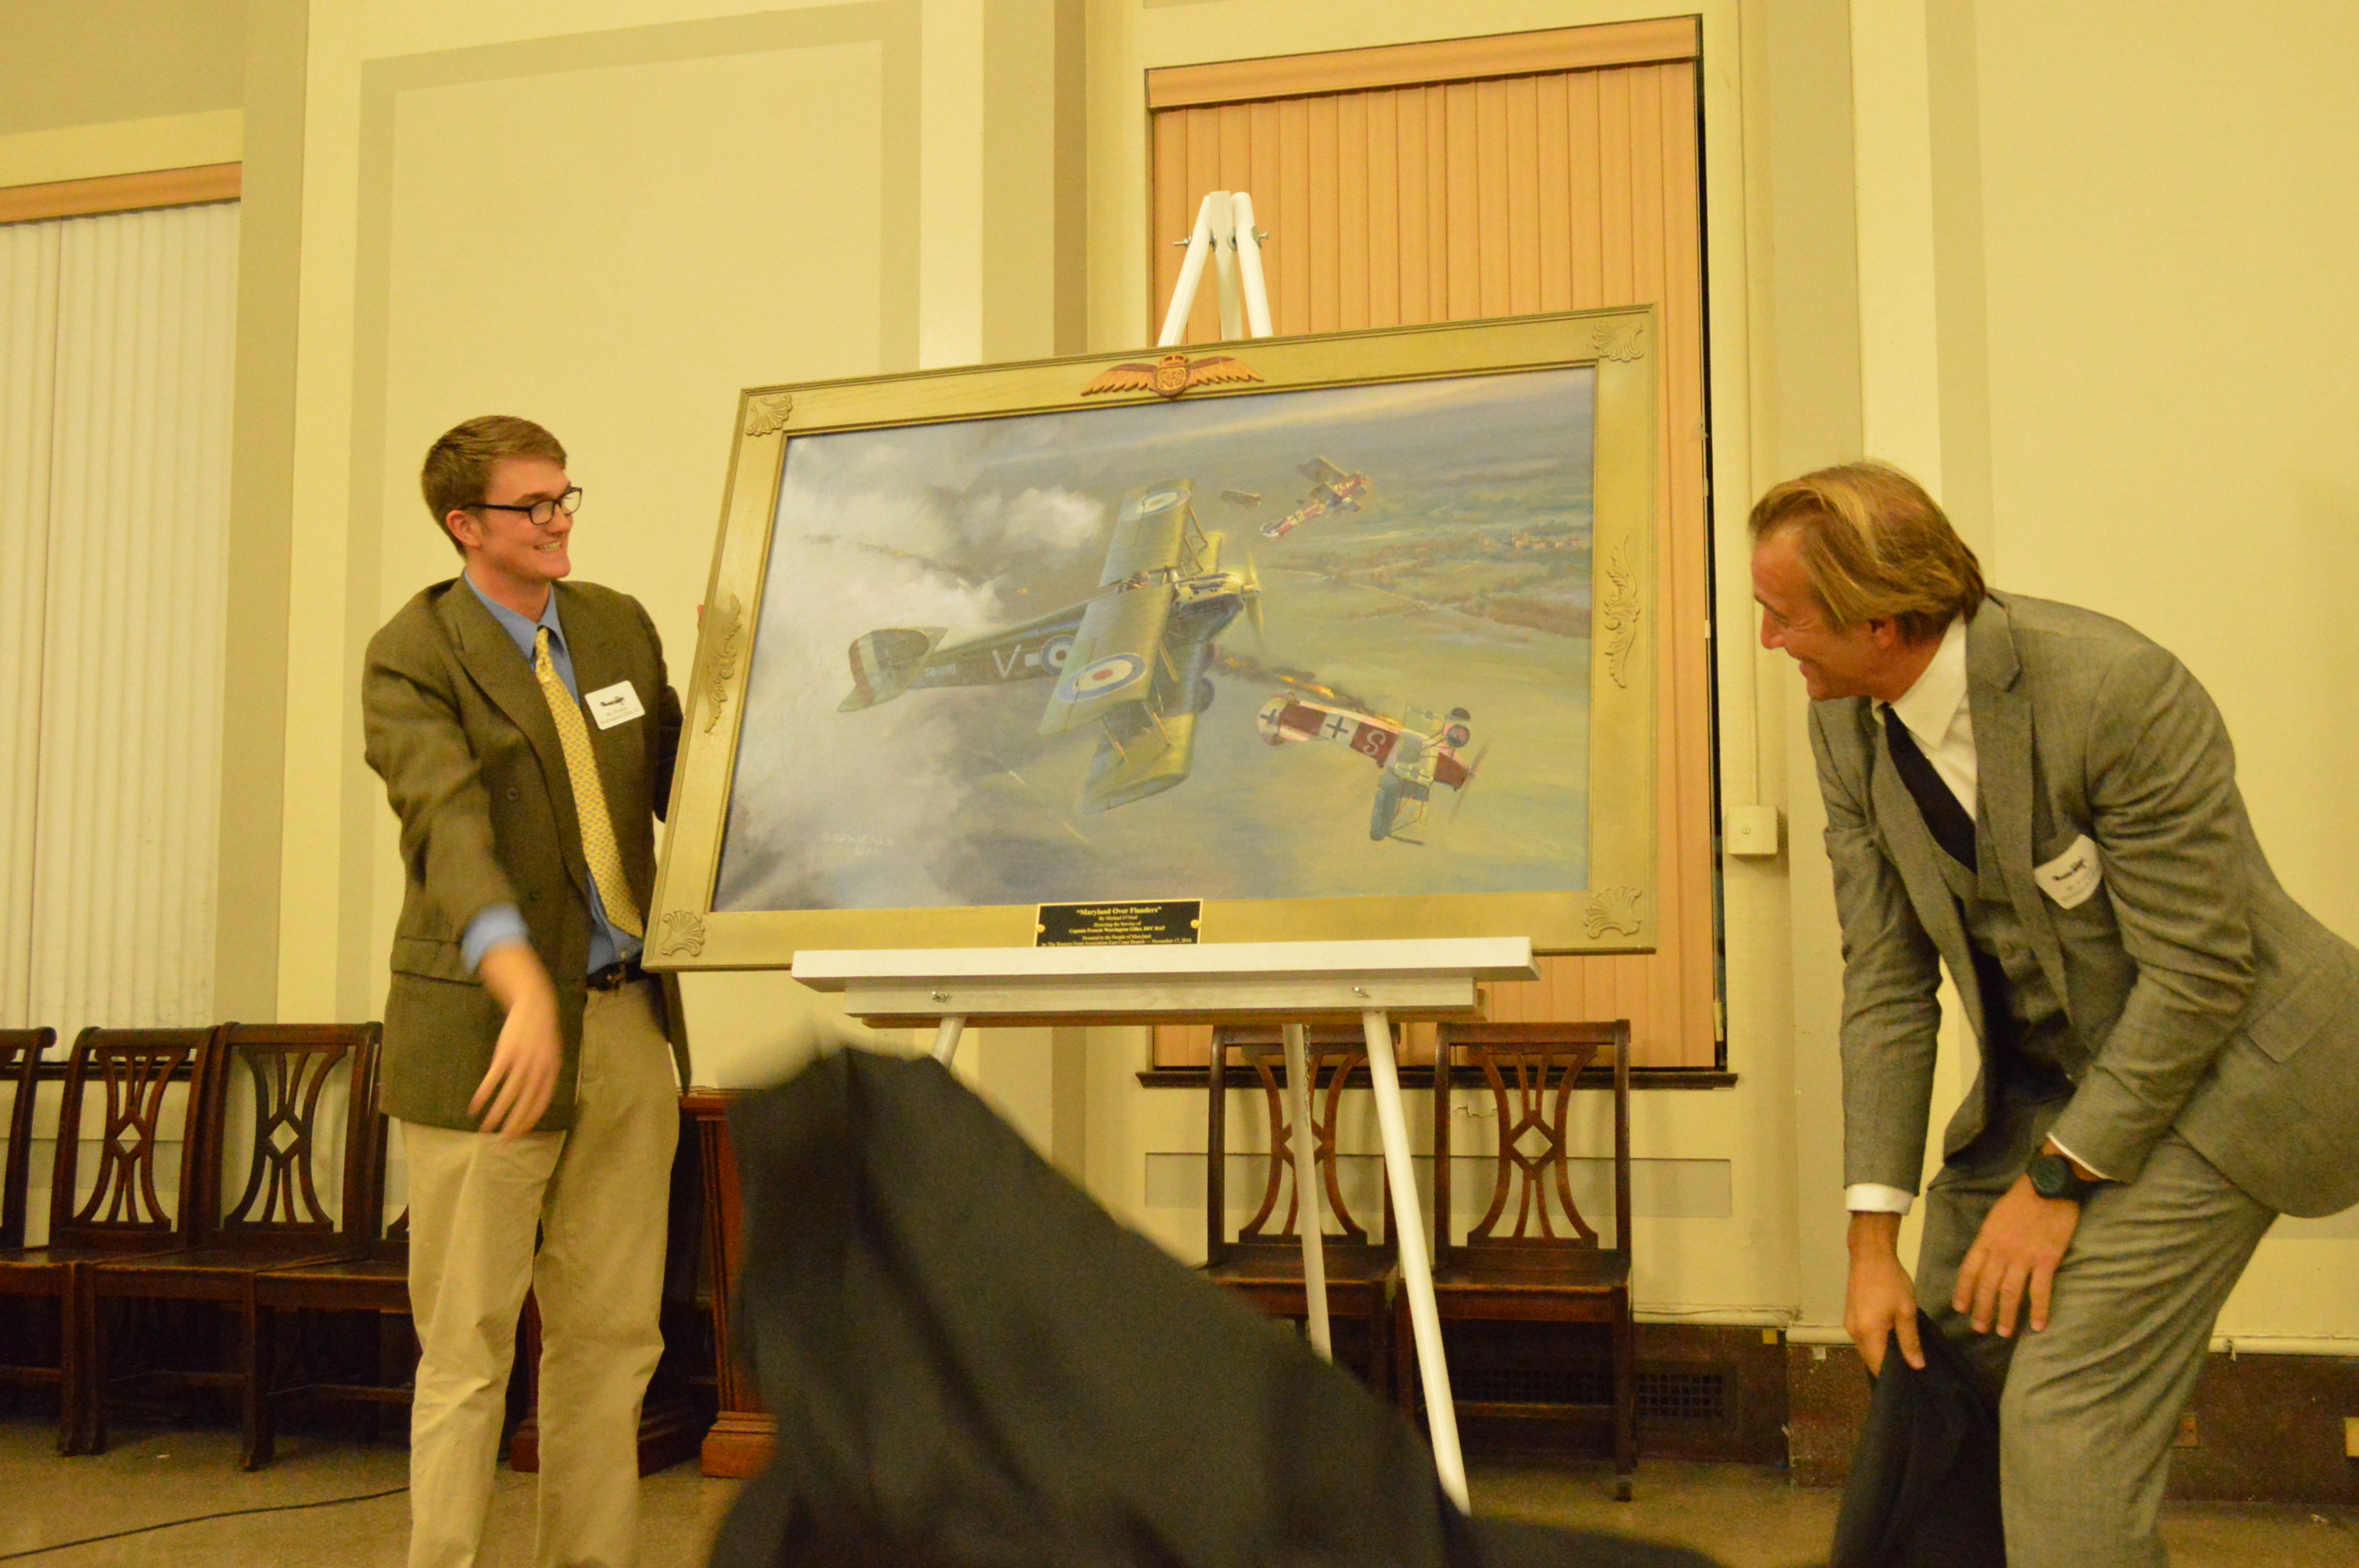 Francis Warrington Gillet IV and his father, Francis Warrington Gillet III, remove the cover from the Michael O’Neal painting titled "Maryland Over Flanders". (Anthony C. Hayes)